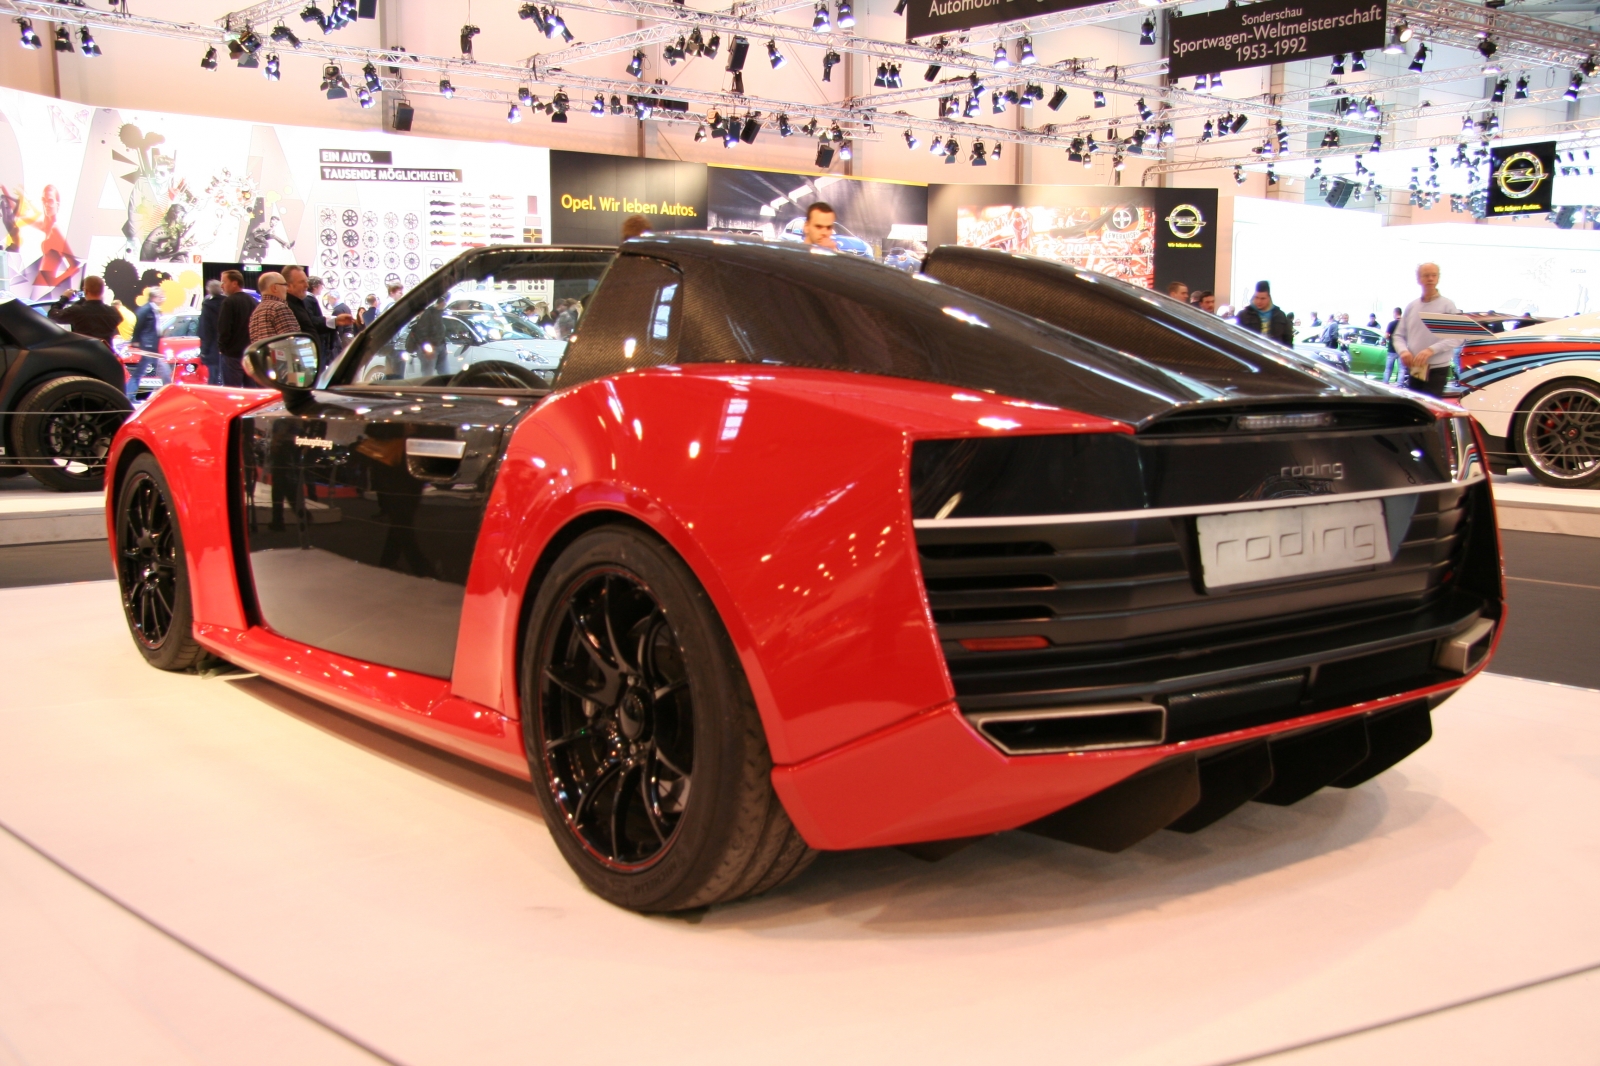 Roding Roadster 23